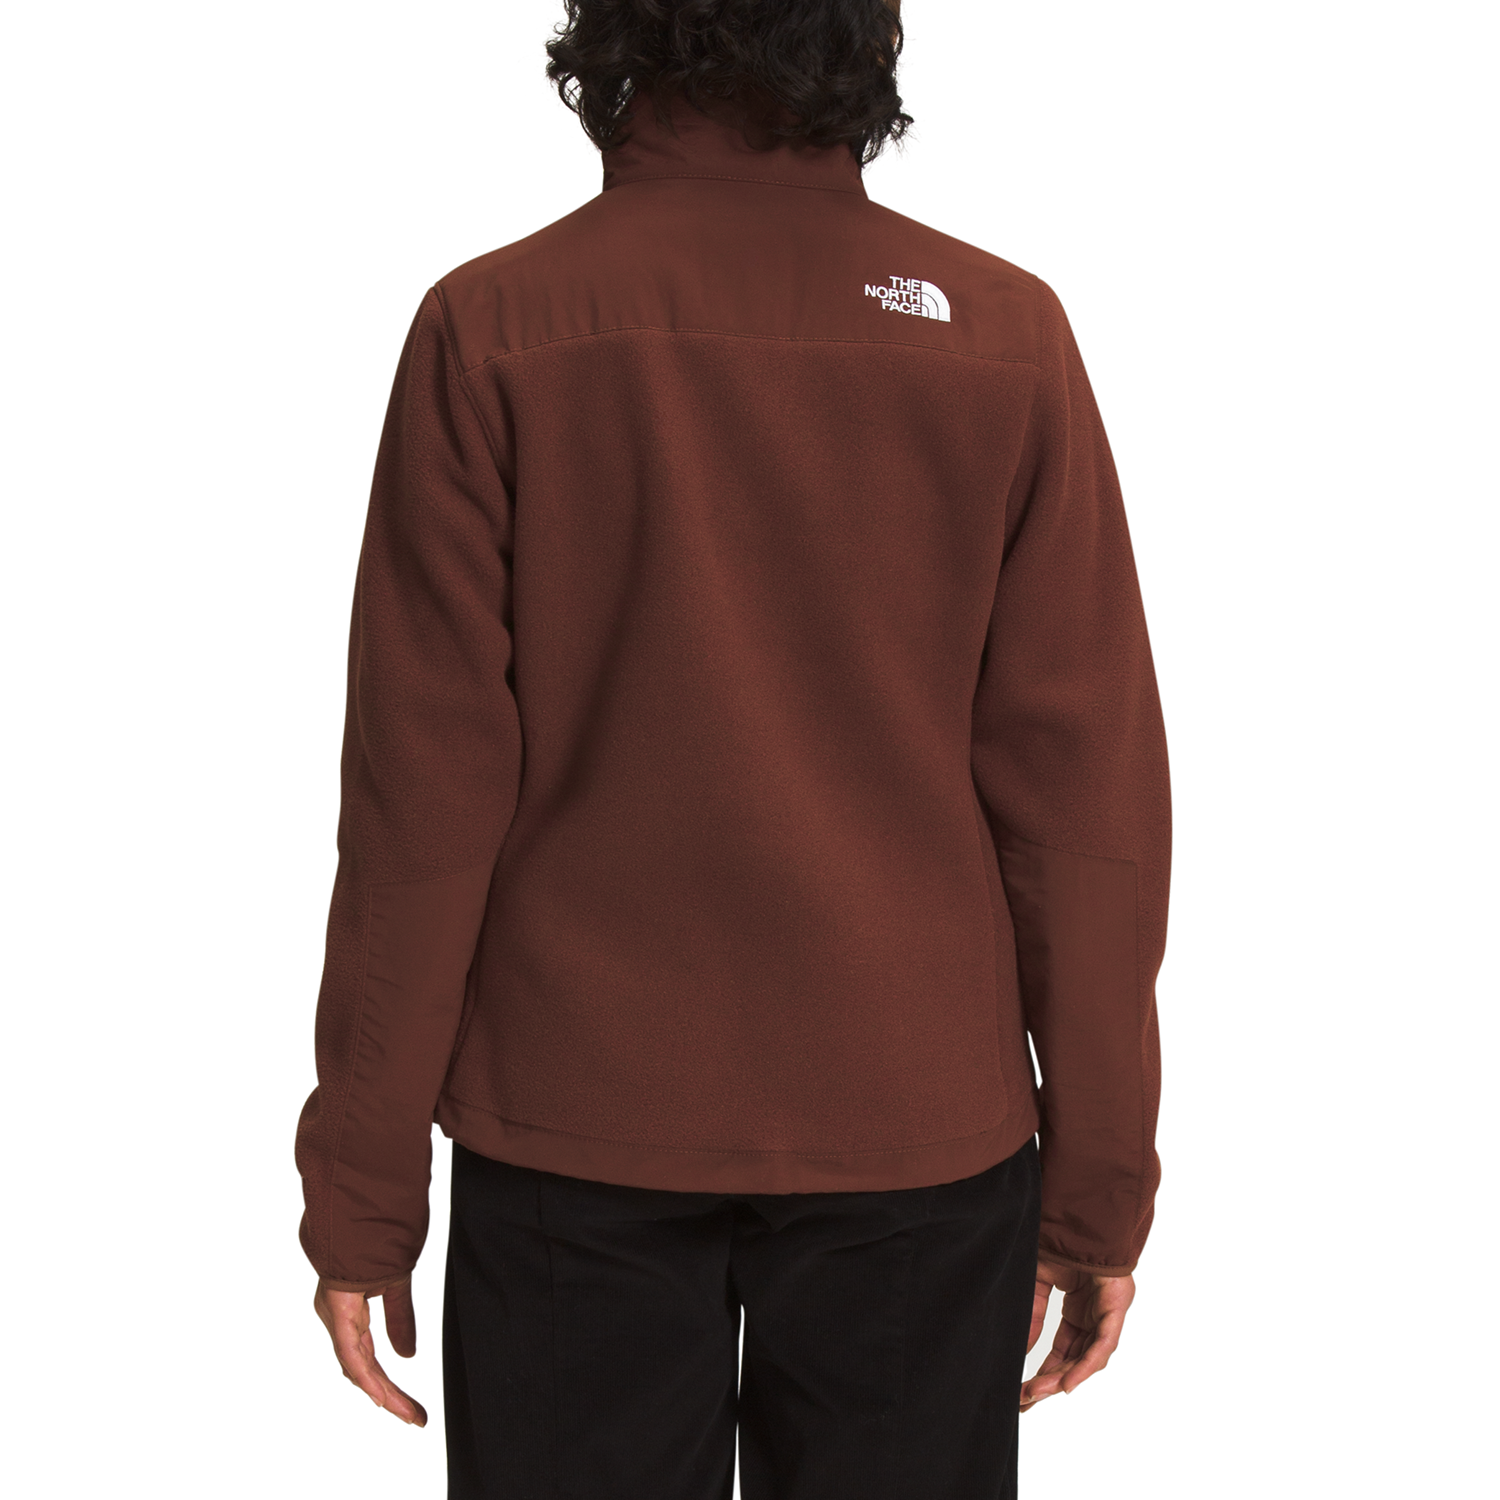 The North Face Candescent Pullover Sweater (Women's)